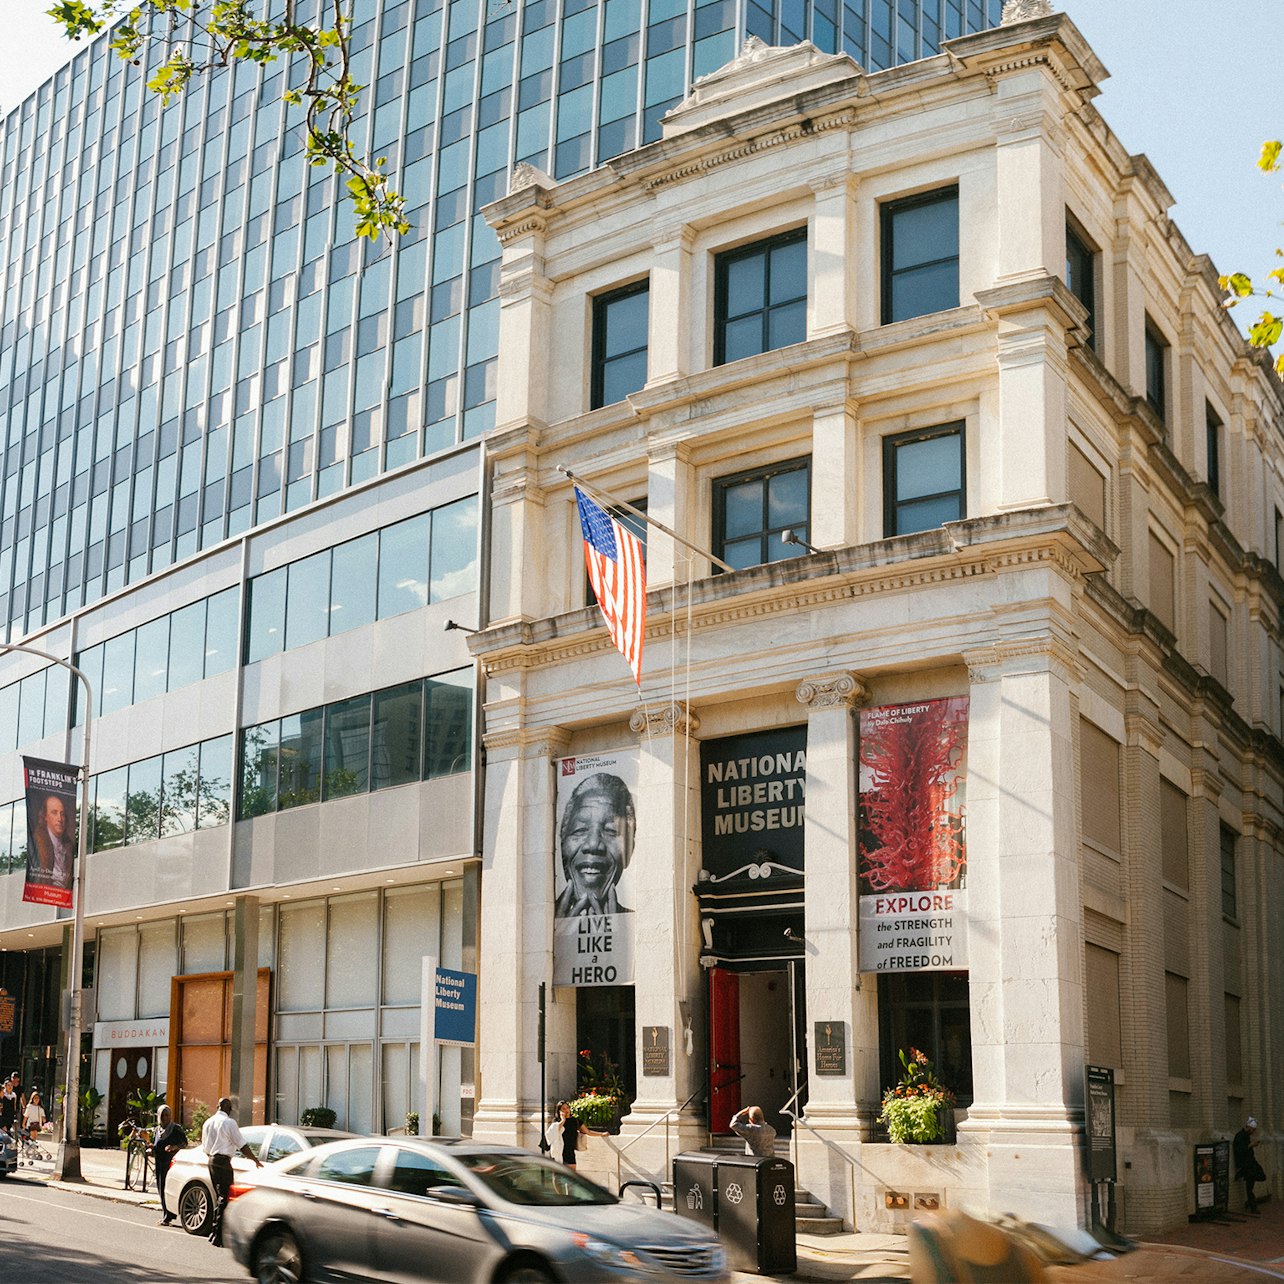 National Liberty Museum: General Admission - Accommodations in Philadelphia